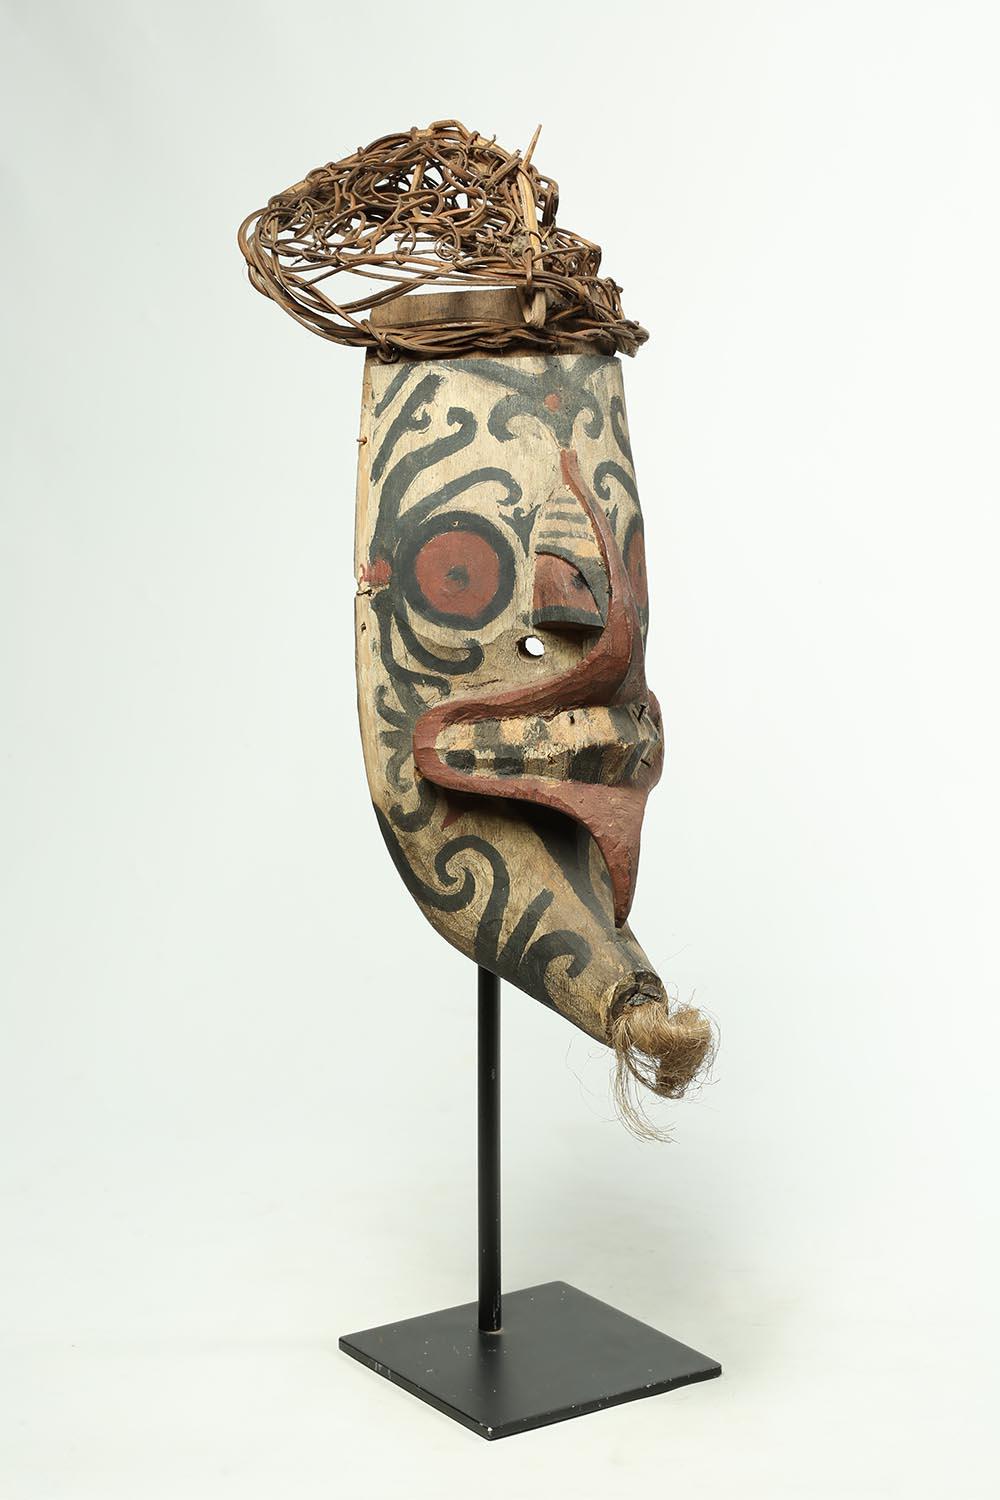 Tribal Wood and Pigment Dayak Hudoq Mask on Stand, Early 20th Century Borneo 3